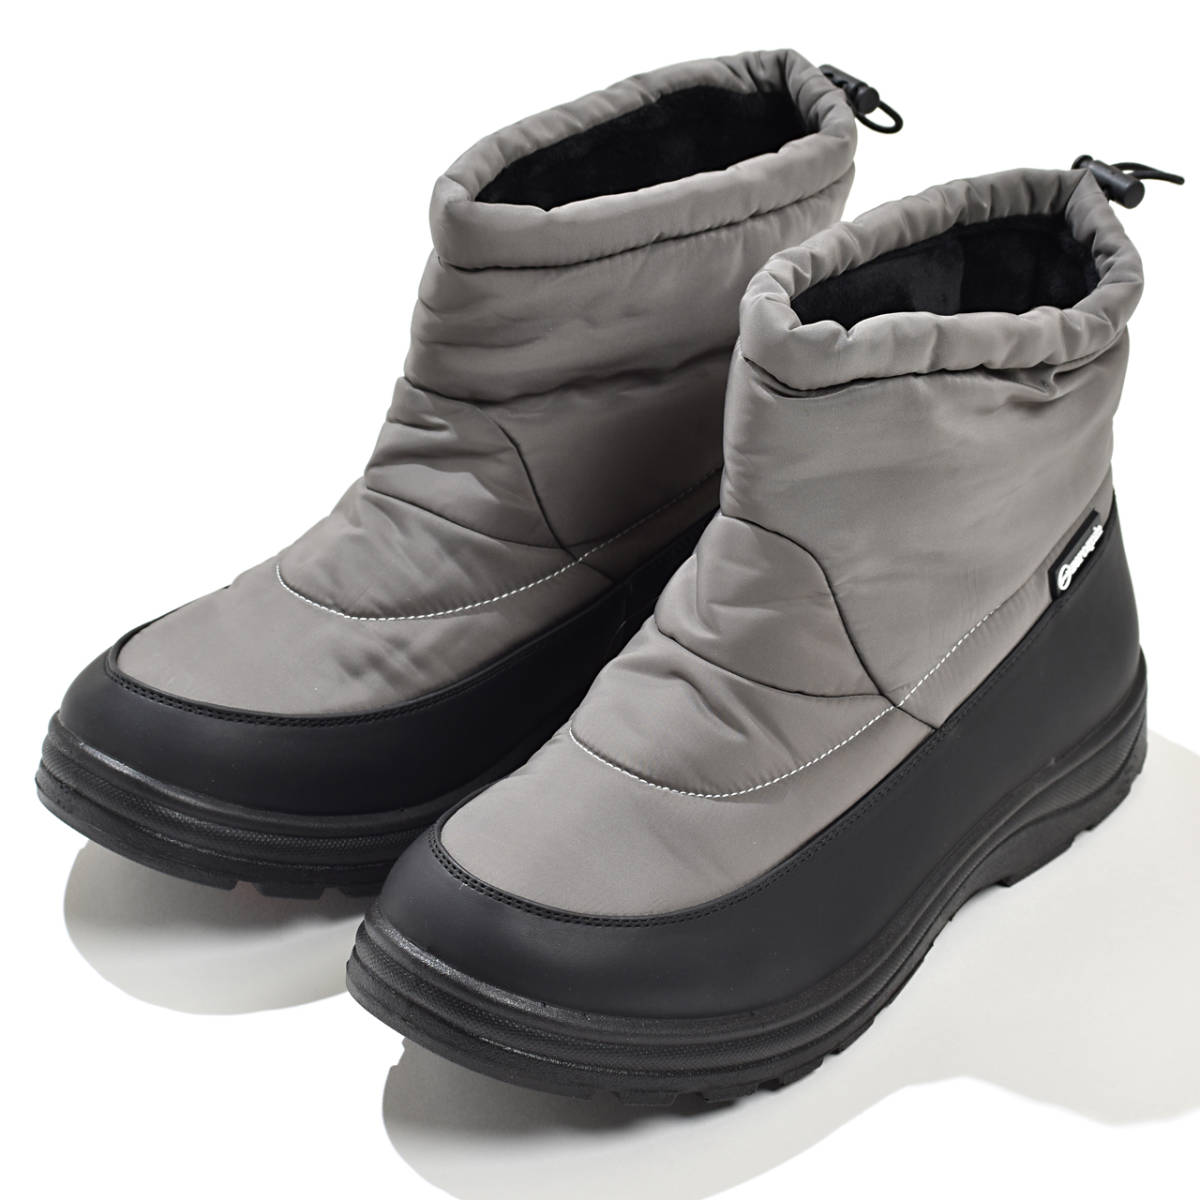  snowshoes snow boots 24.5cm lady's protection against cold boots gray woman women's shoes winter snow 